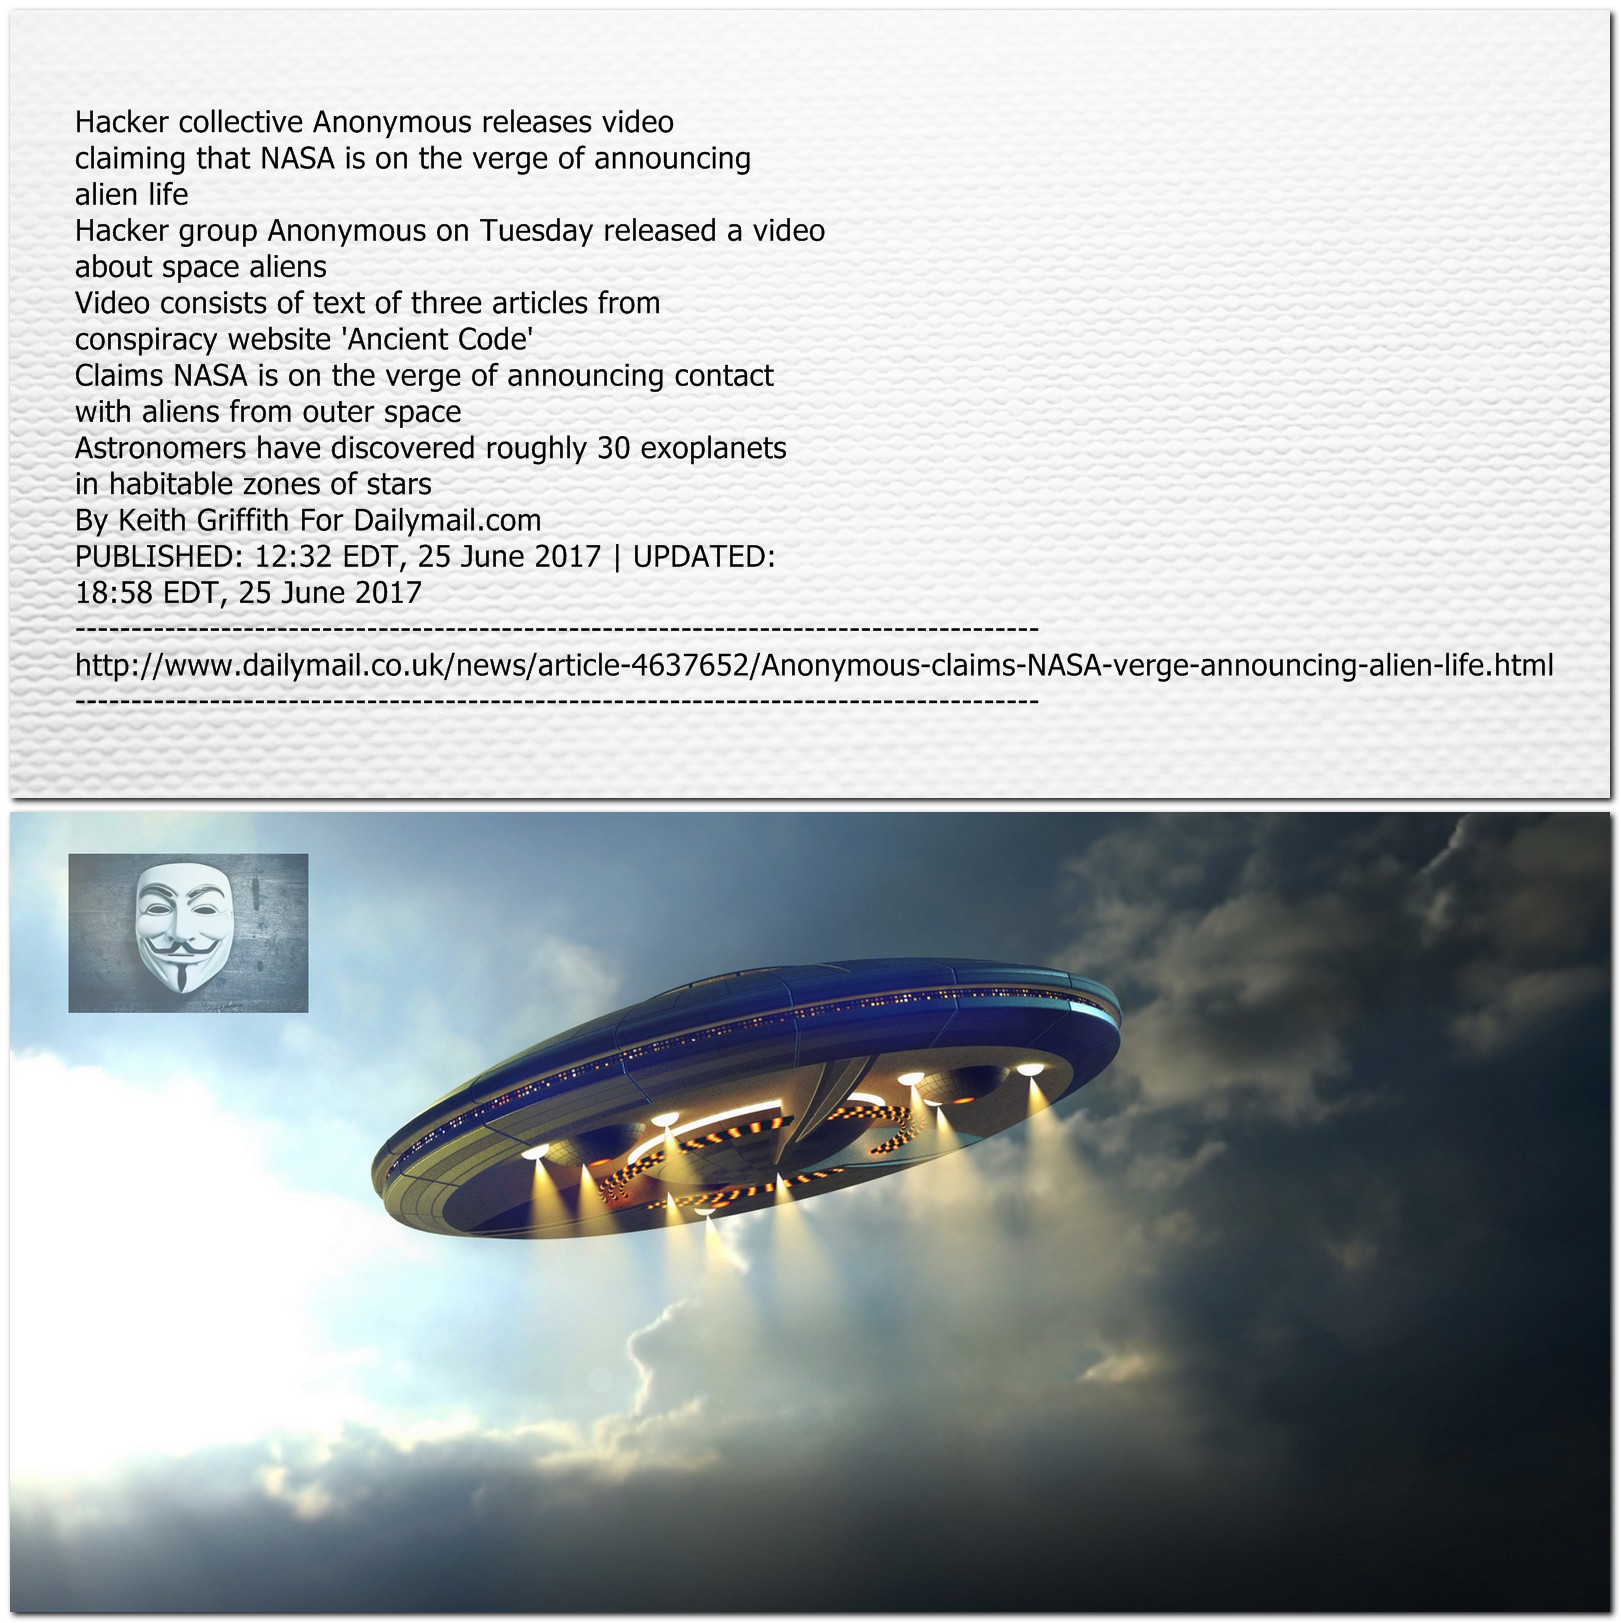 Hacker collective Anonymous releases video claiming that NASA is on the verge of announcing alien life
Hacker group Anonymous on Tuesday released a video about space aliens
Video consists of text of three articles from conspiracy website 'Ancient Code'
Claims NASA is on the verge of announcing contact with aliens from outer space